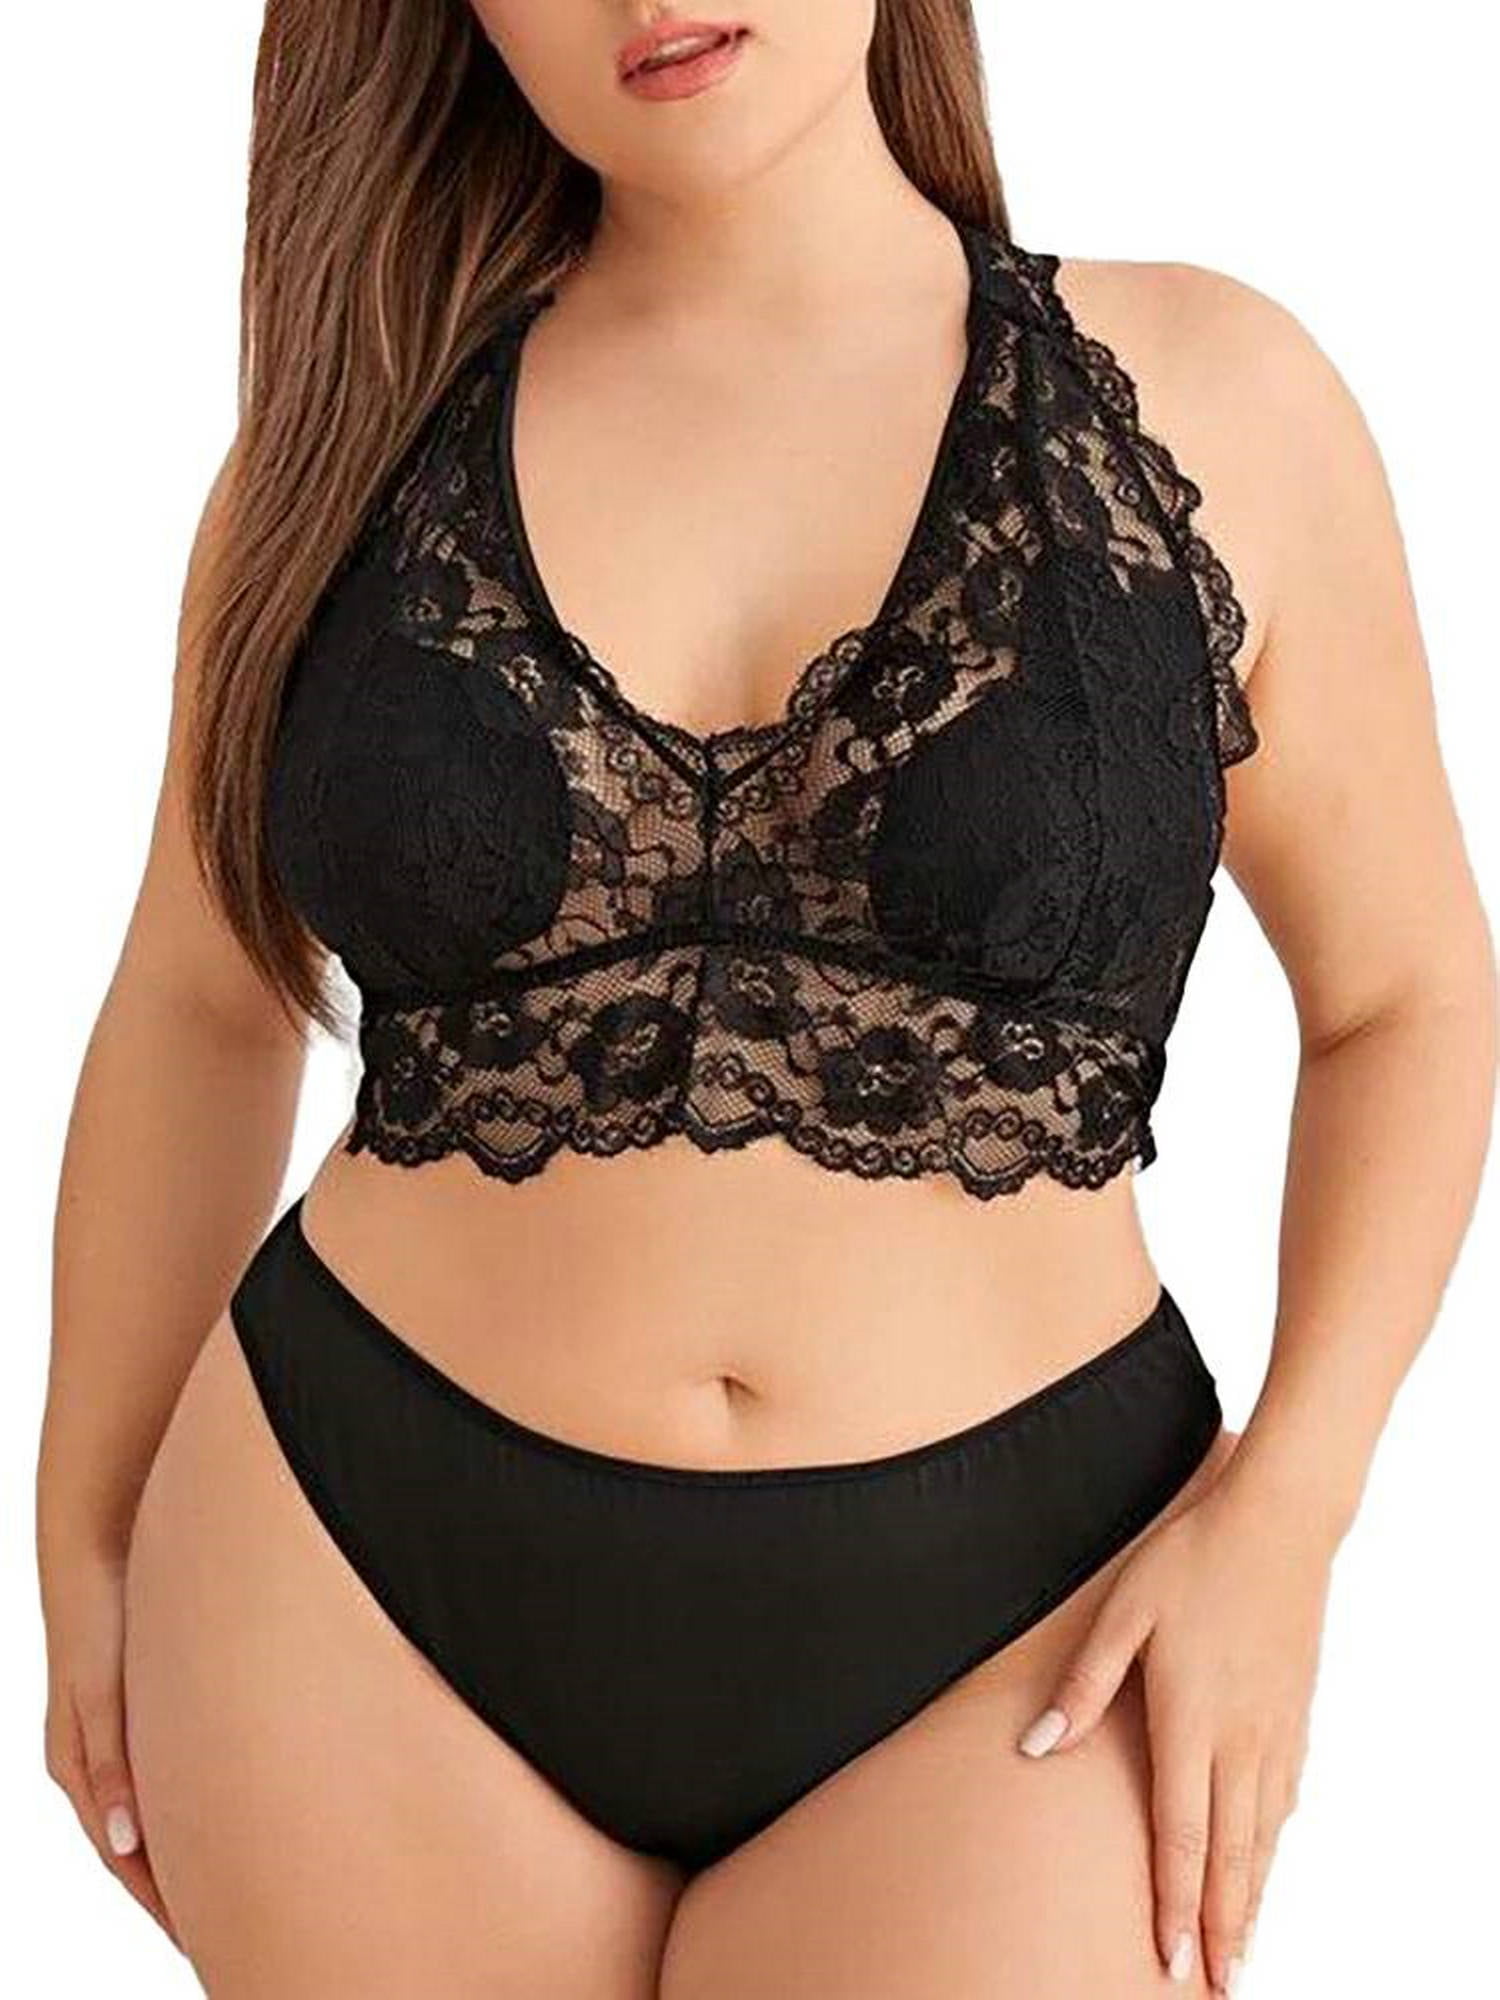  Women Plus Size Lingerie Sets Sexy Halter Bra and